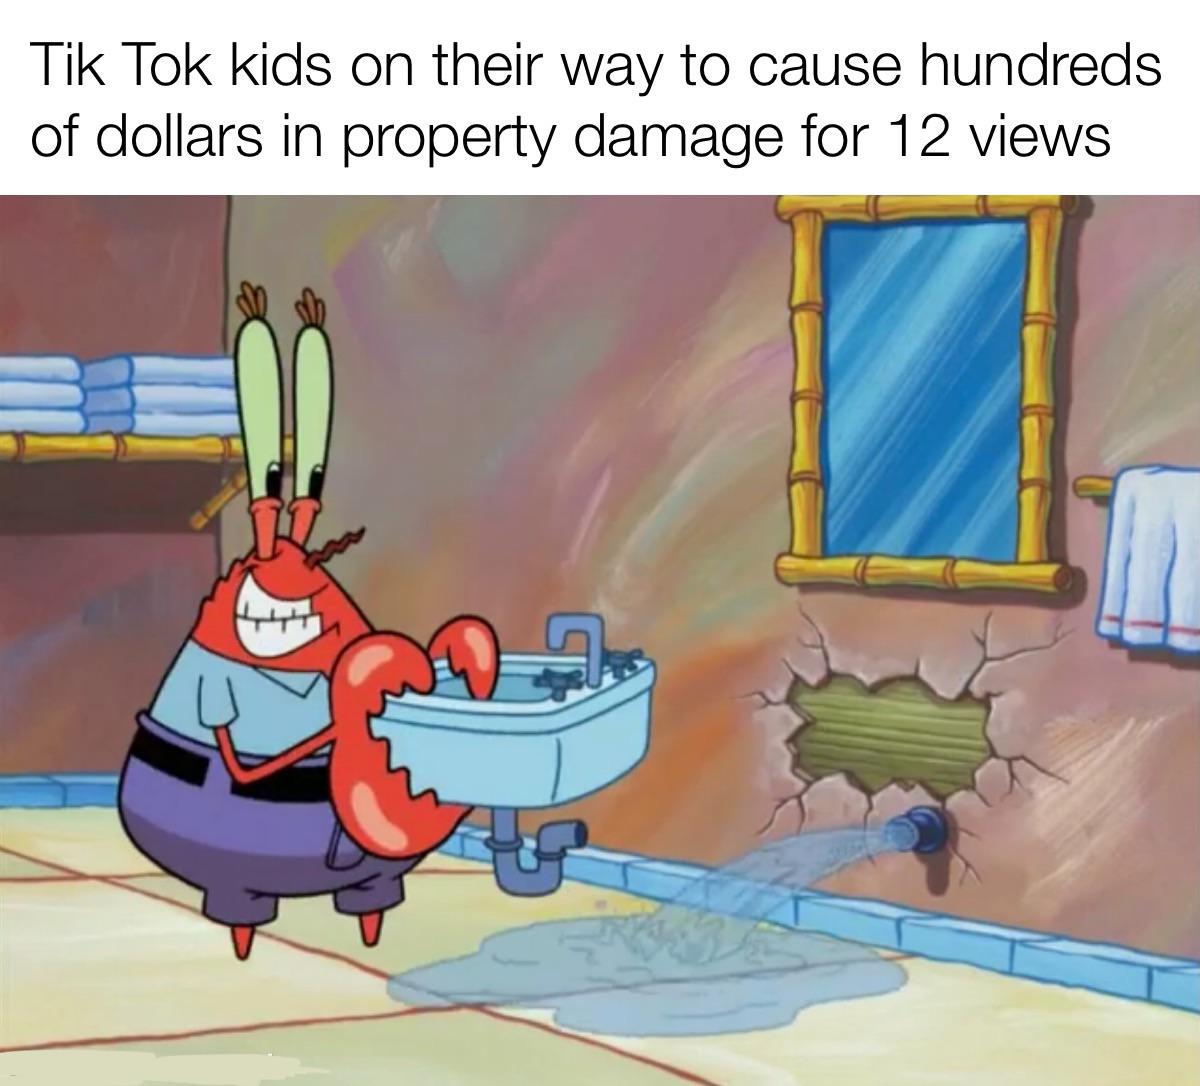 cartoon - Tik Tok kids on their way to cause hundreds of dollars in property damage for 12 views